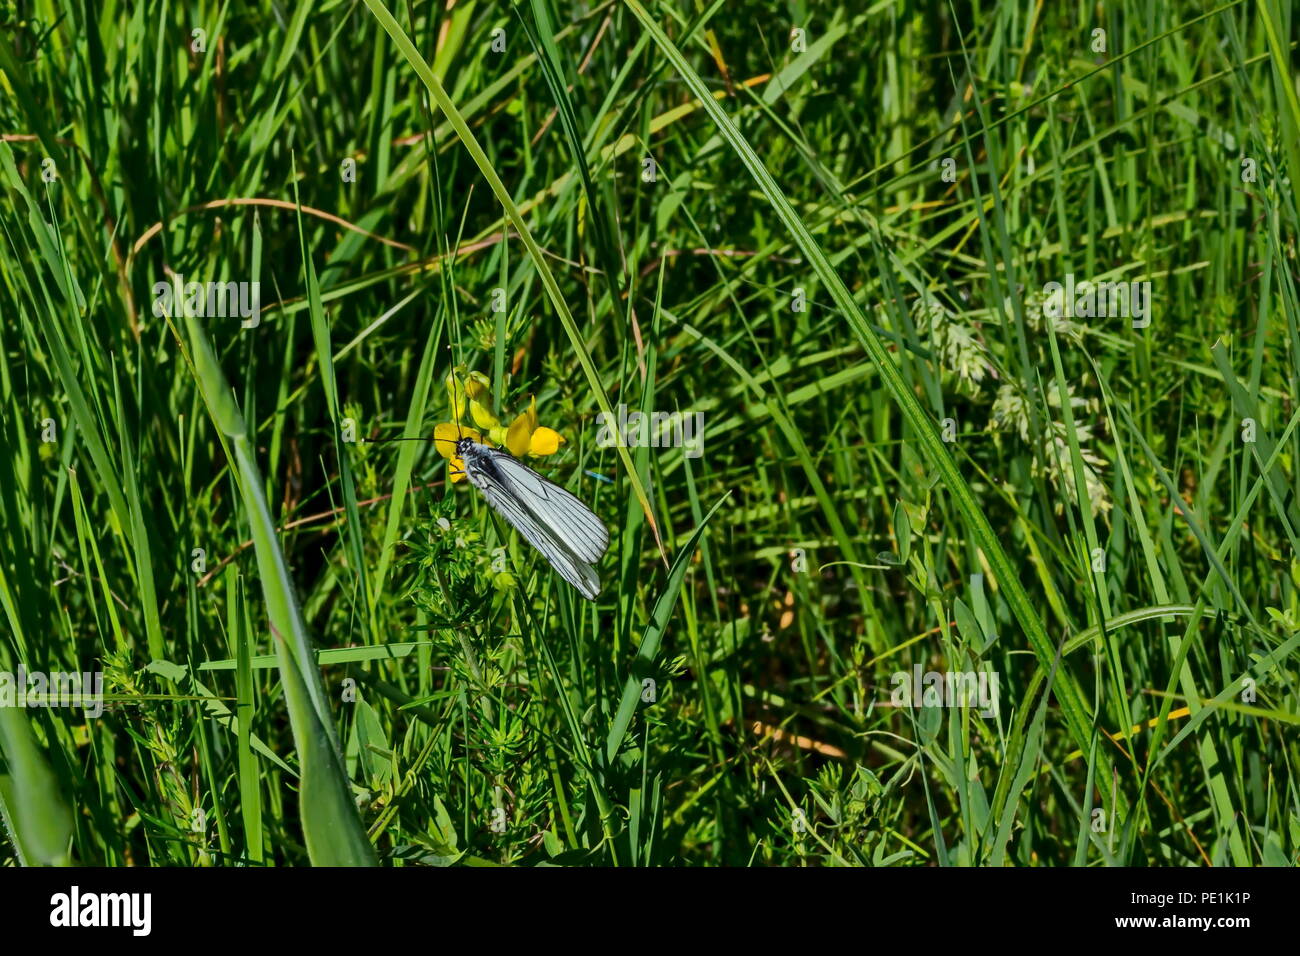 The insect pest American white butterfly, Black-veined White, Aporia crataegi or Hyphantria cunea on the yellow flower, district Marchaevo, Sofia, Vit Stock Photo